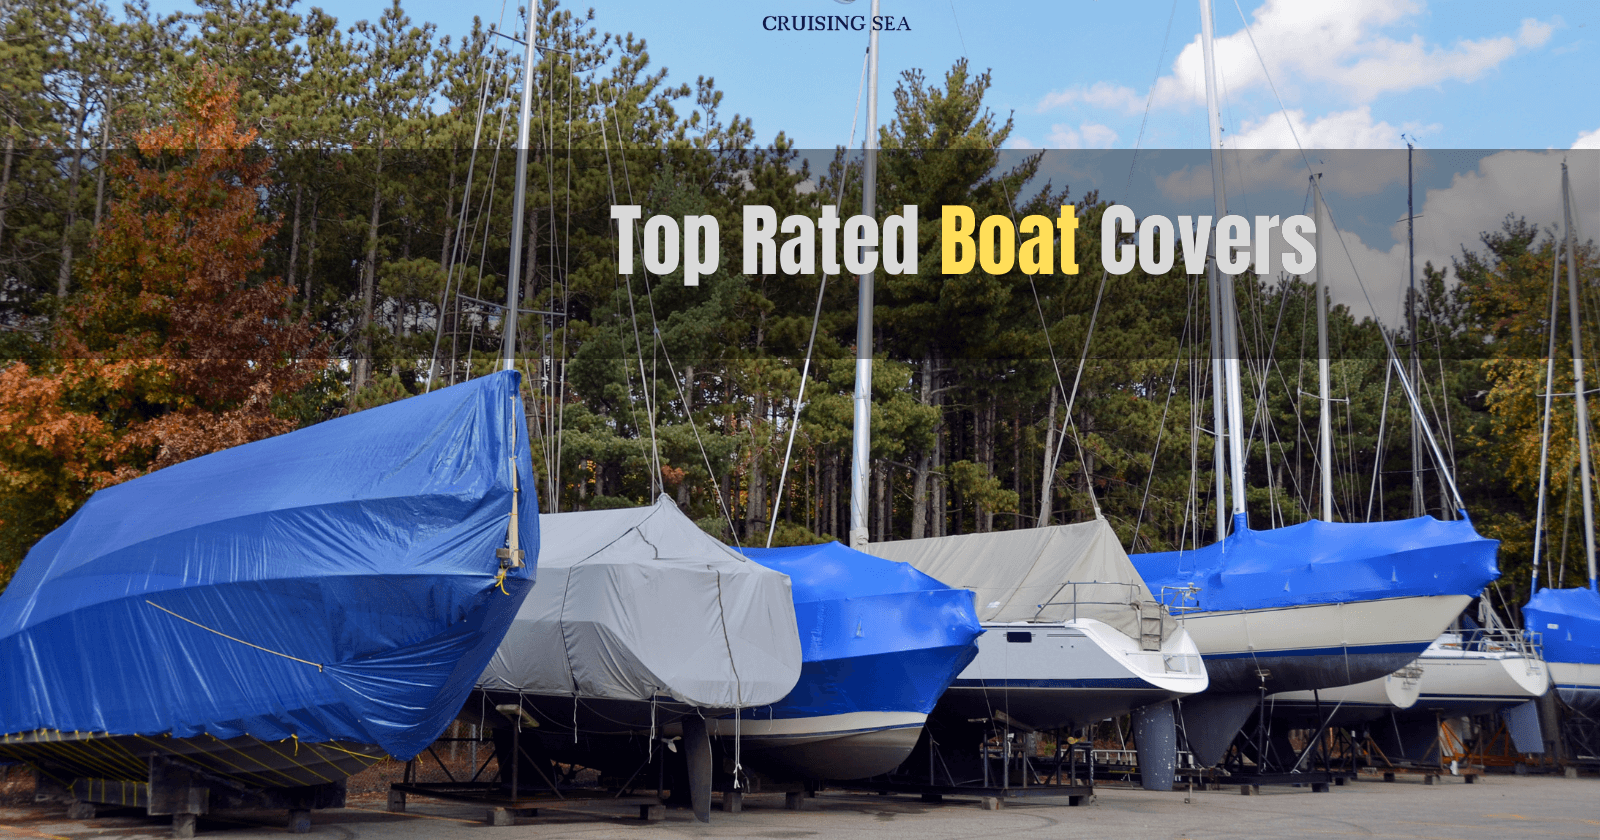 11 Top Rated Boat Covers 2023 - Reviews & Buying Guide